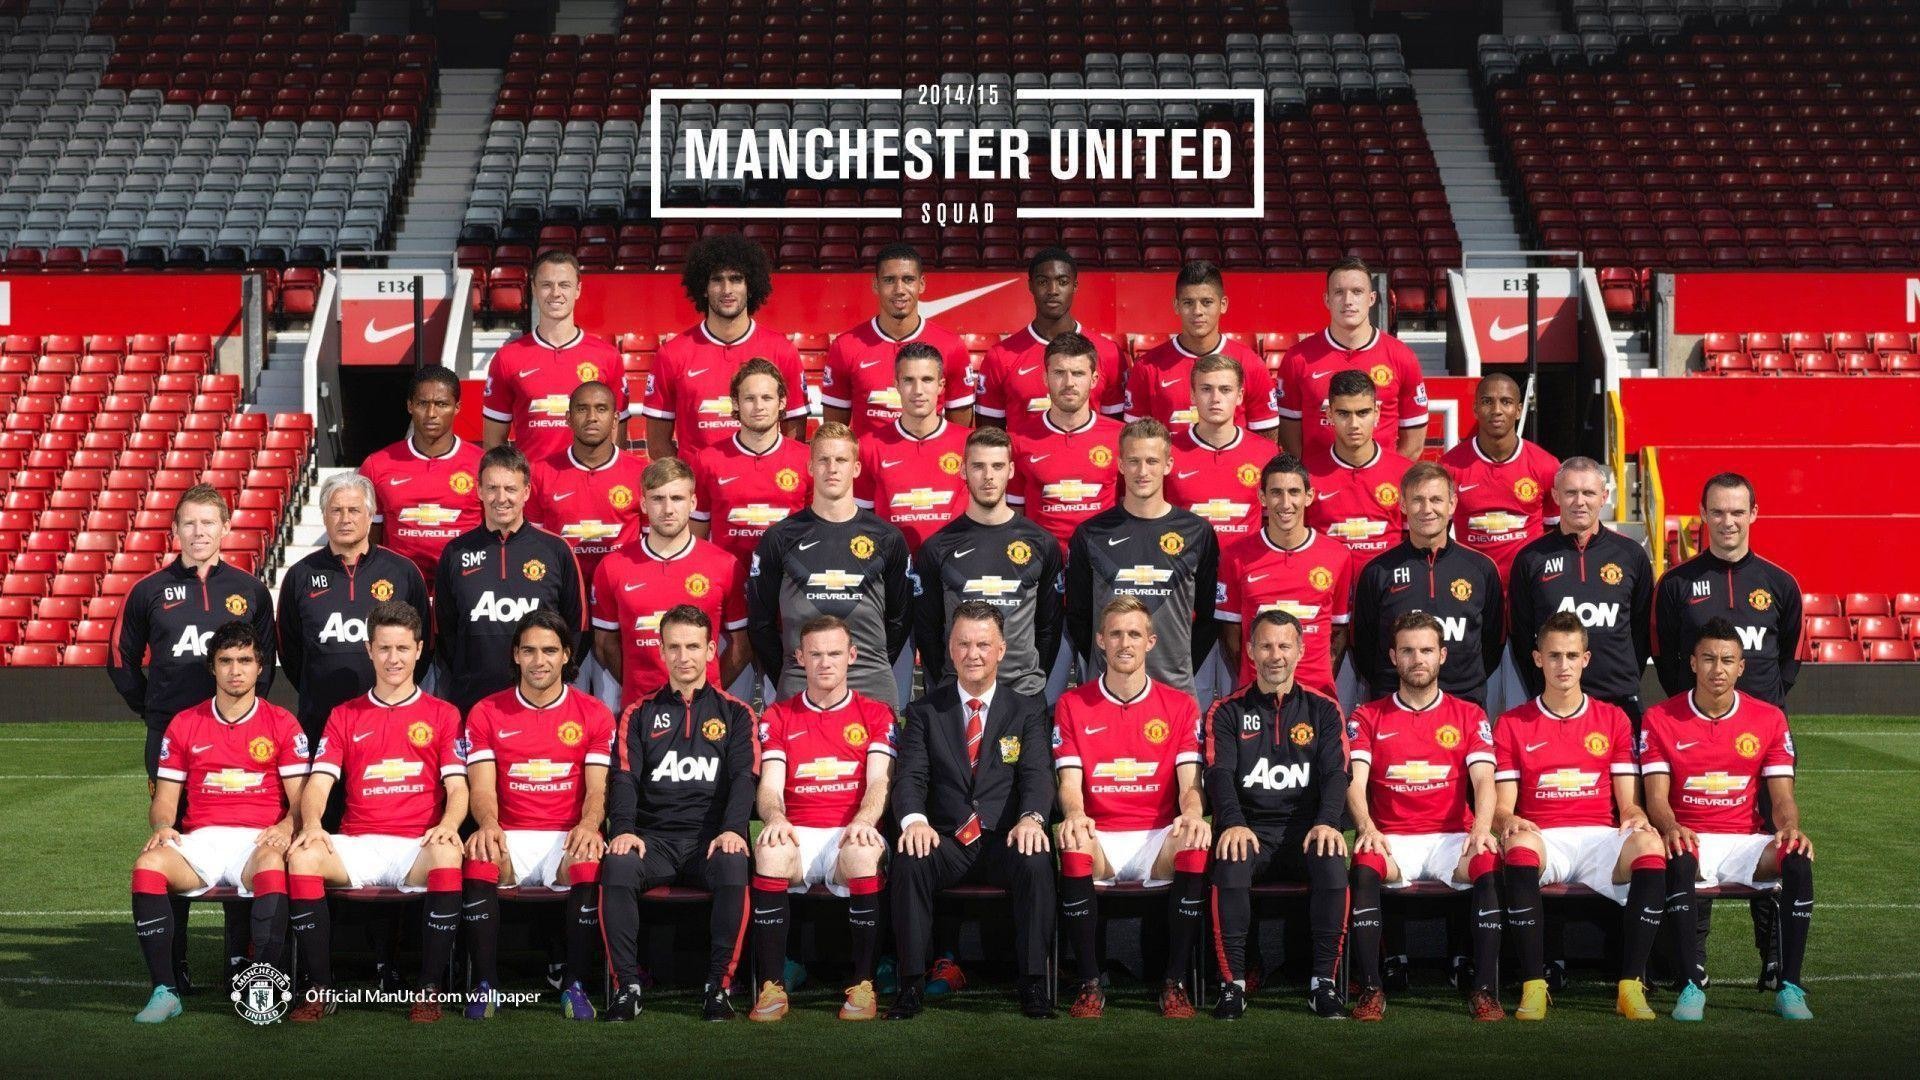 1920x1080 Manchester United 2014-2015 Squad Photo Wallpaper Wide or HD .